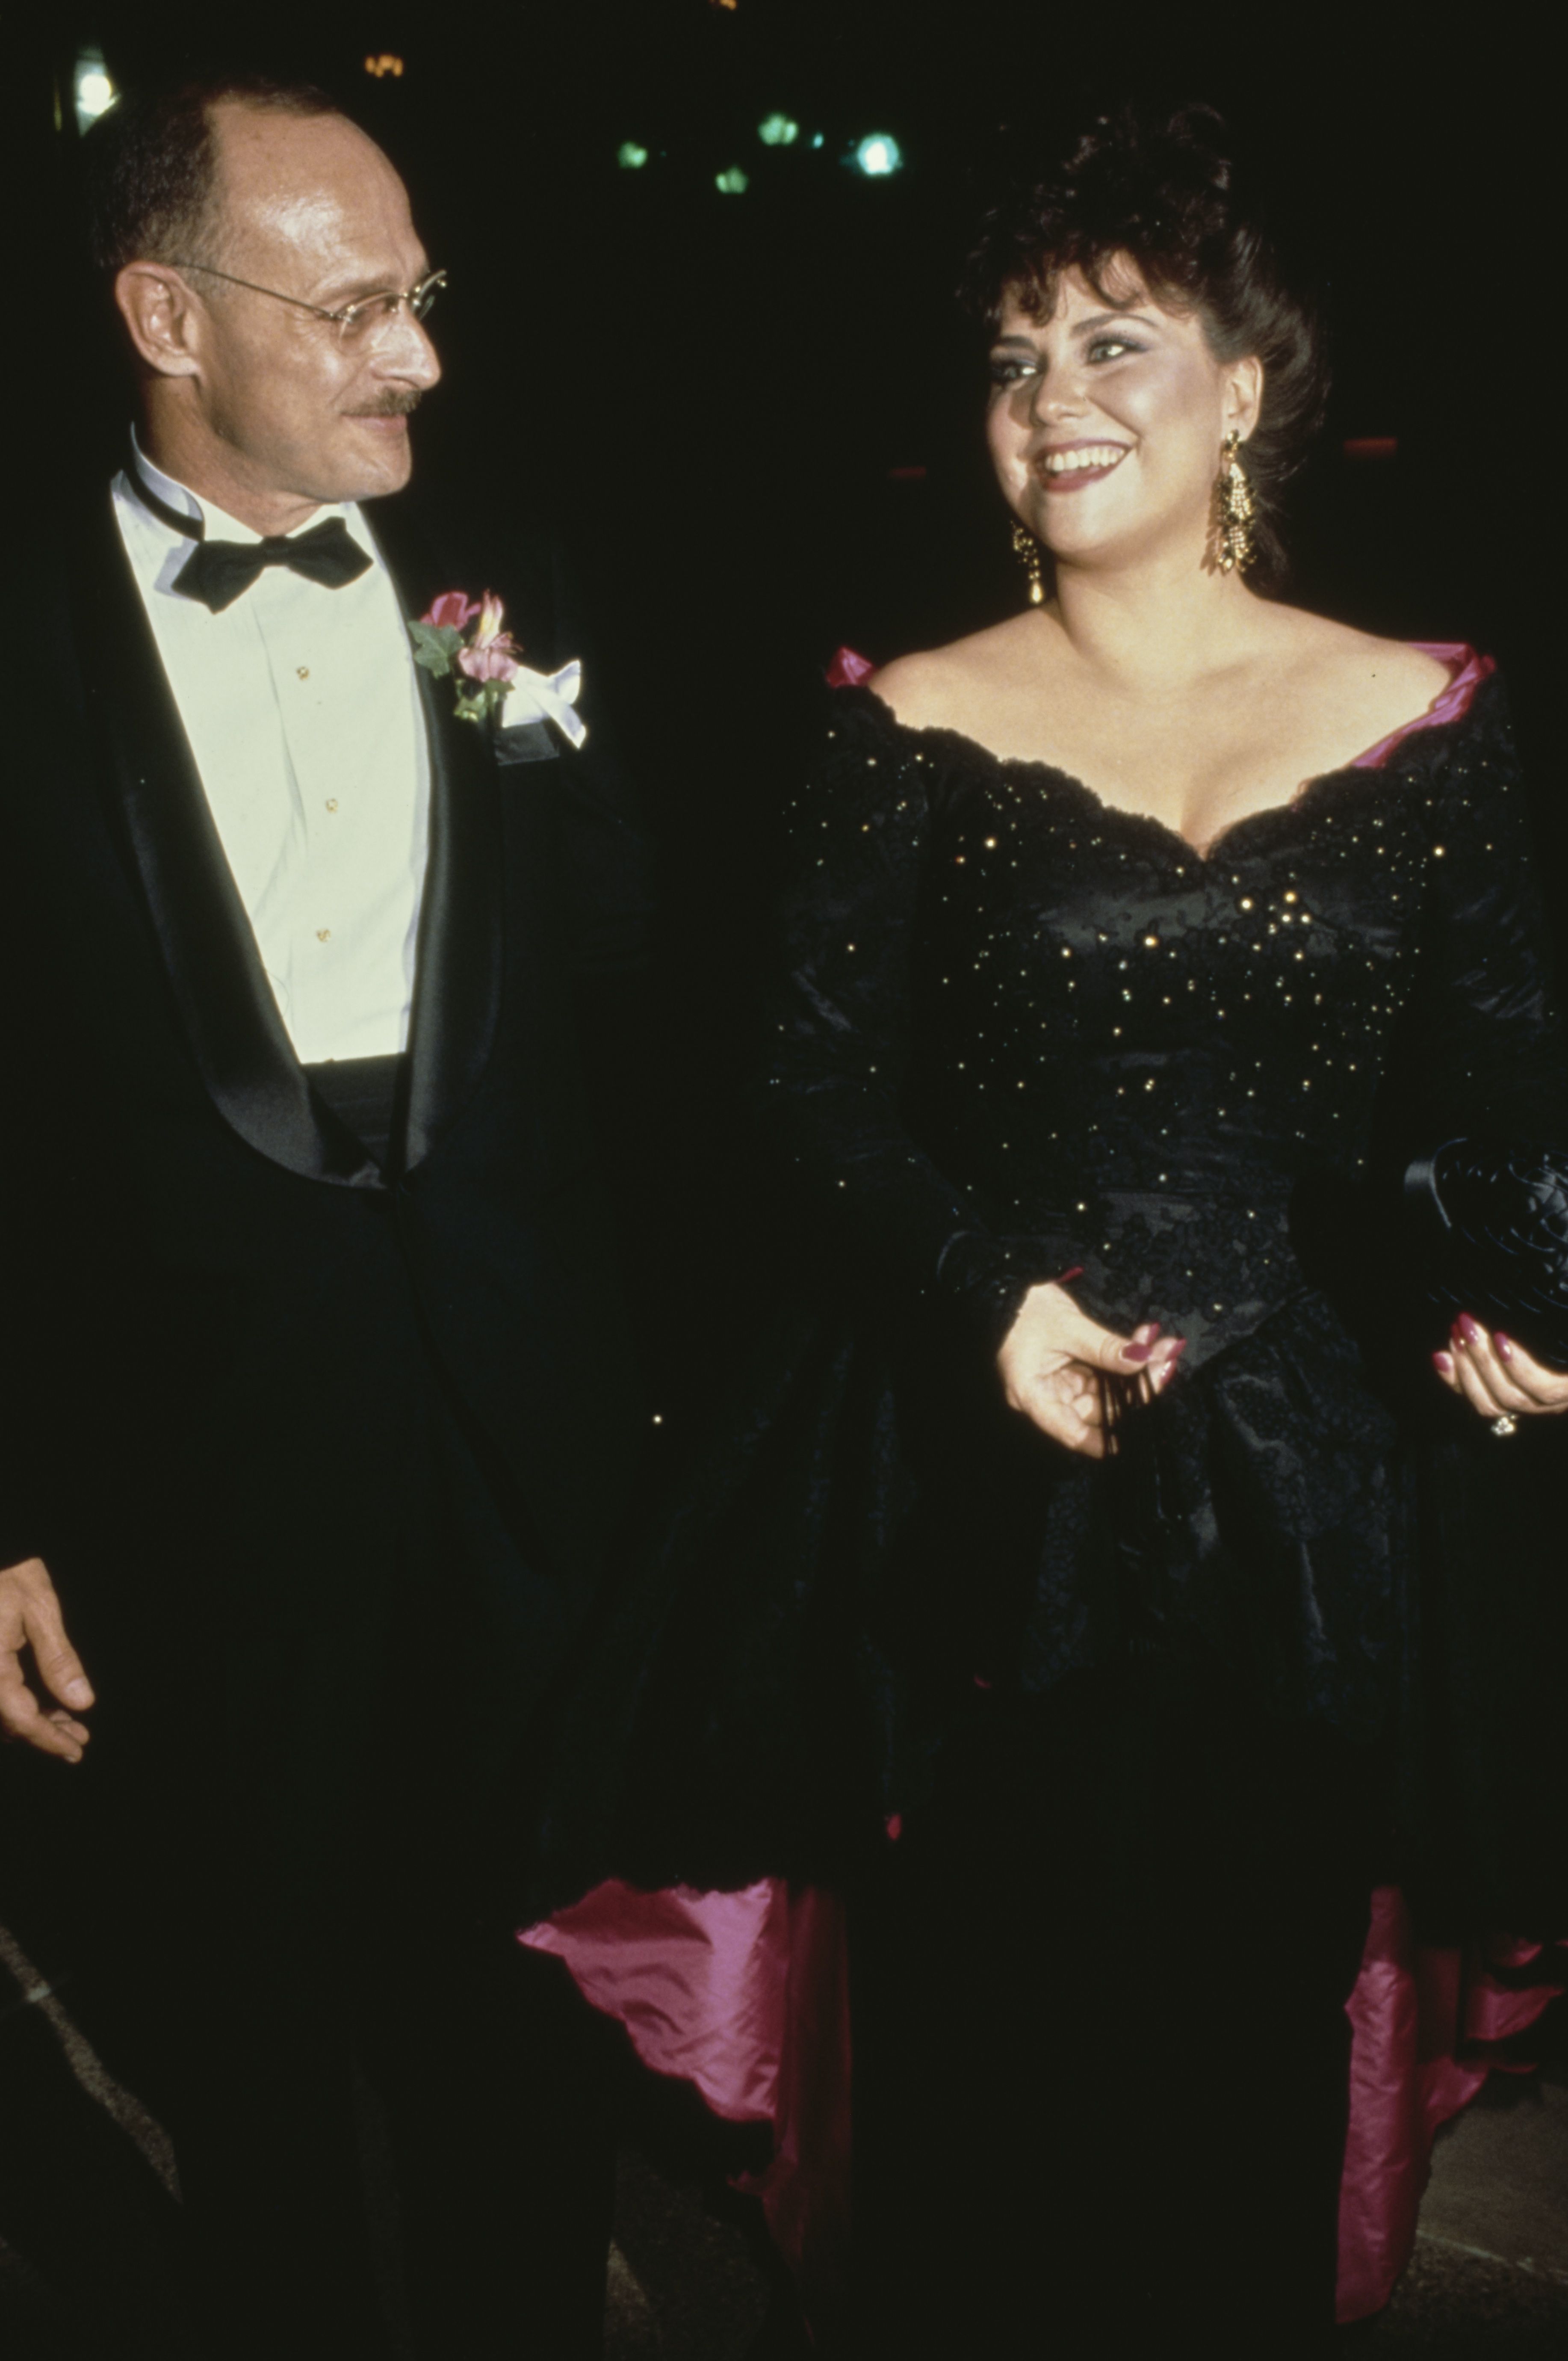 Gerald McRaney and Delta Burke at the 42nd Annual Primetime Emmy Awards, held at the Pasadena Civic Auditorium in Pasadena, California, September 16, 1990 | Source: Getty Images